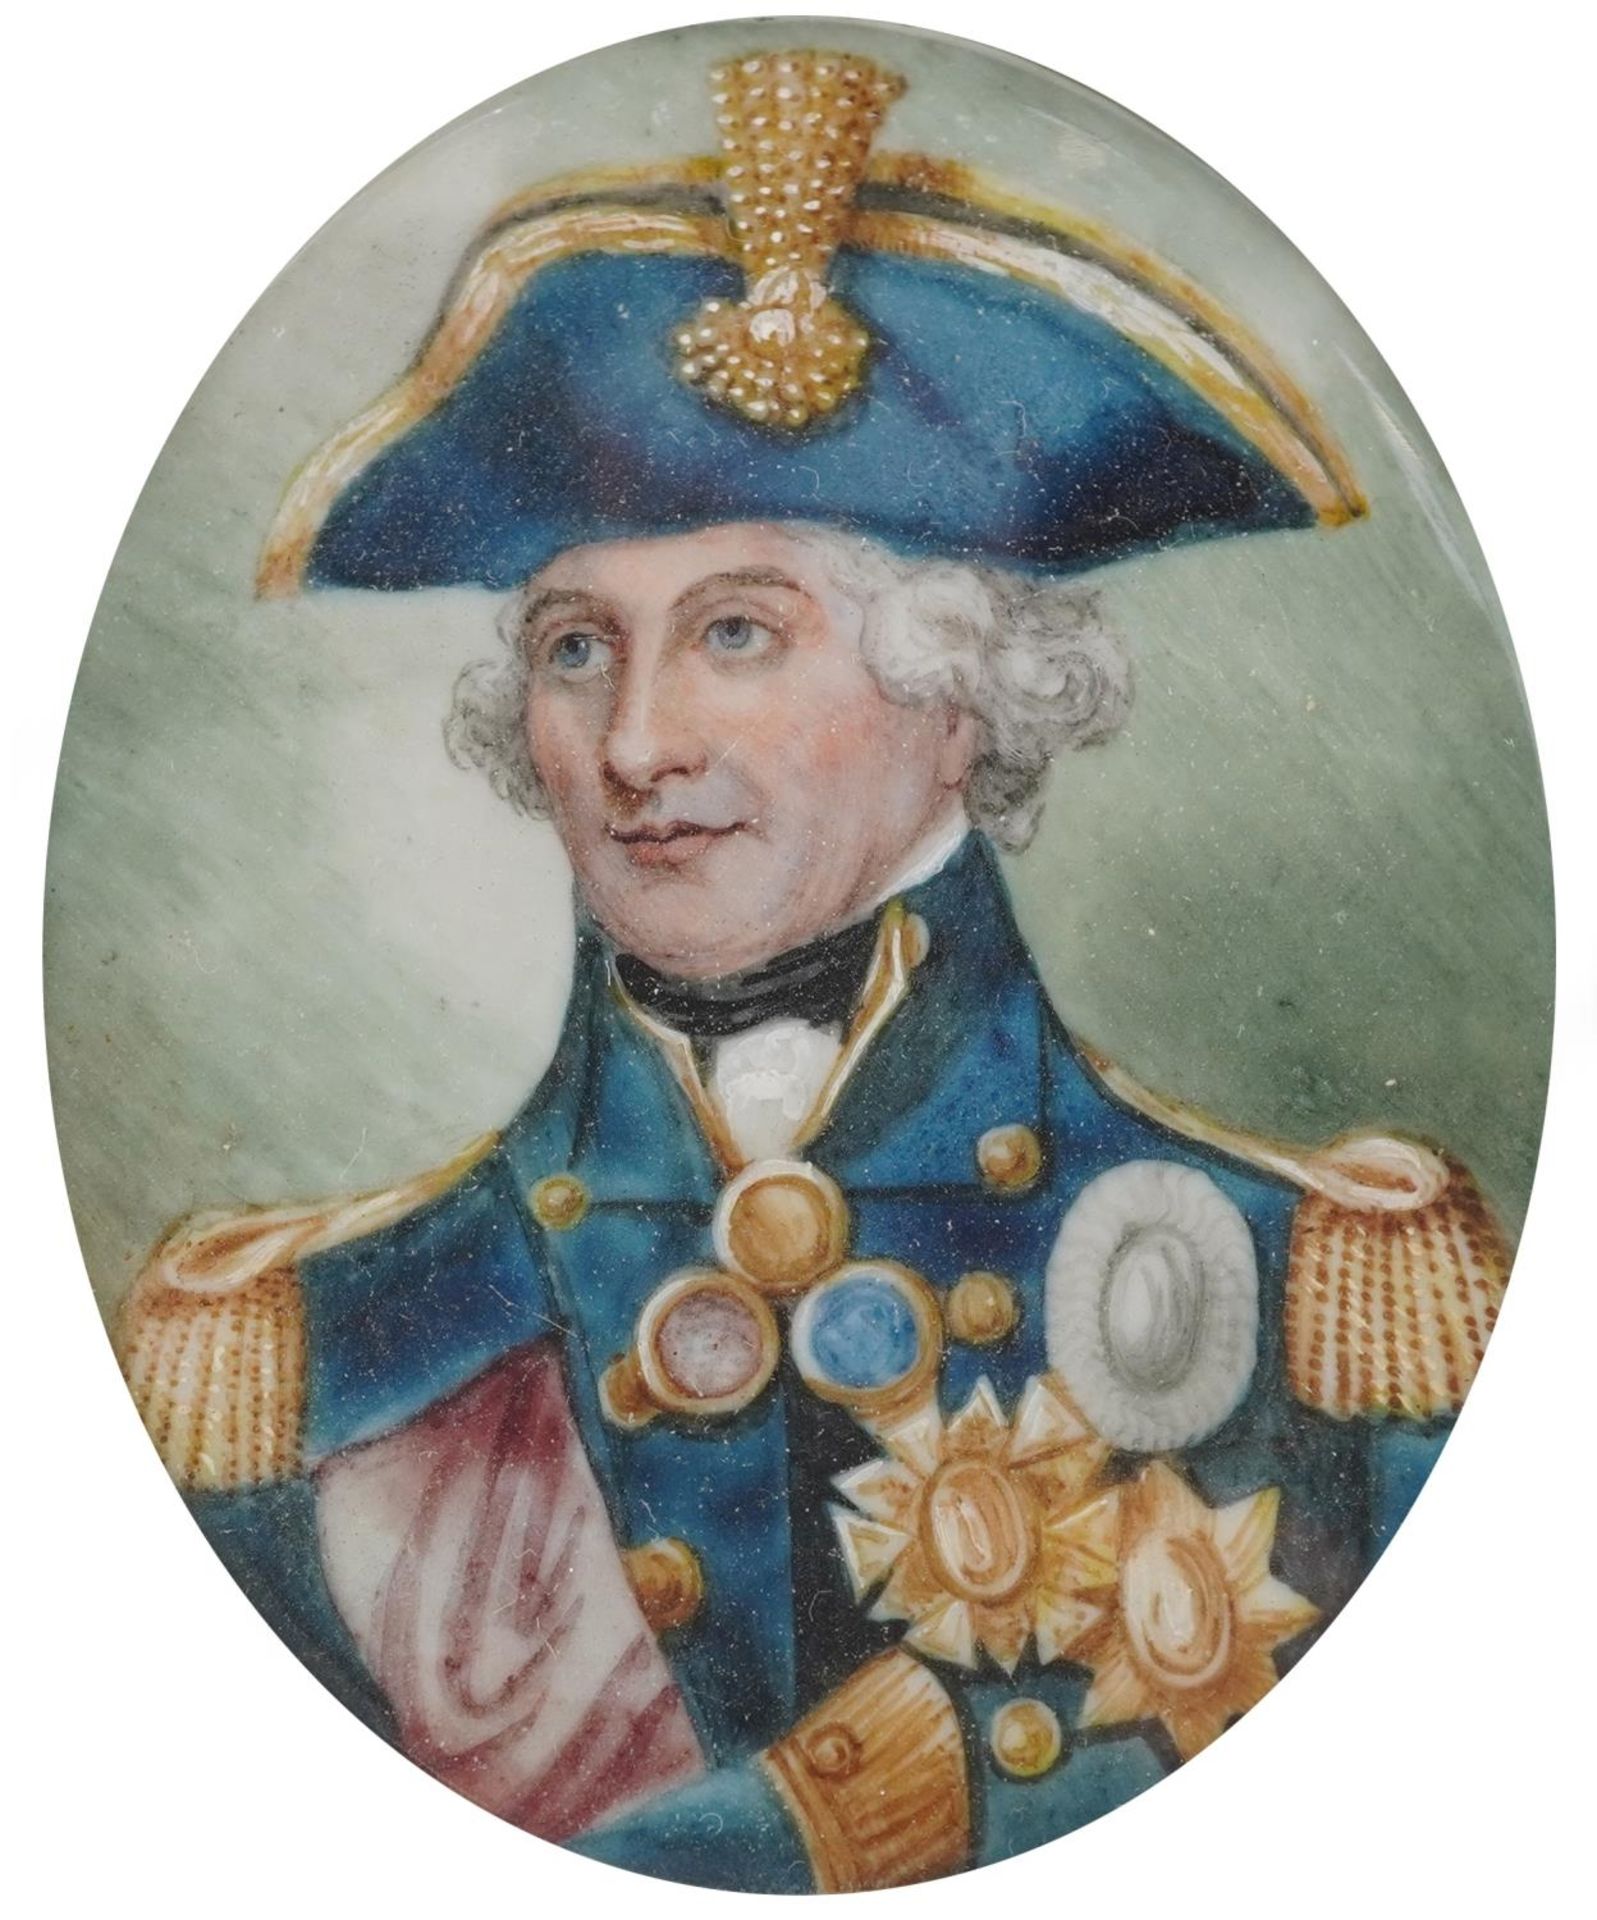 Naval interest oval hand painted portrait miniature of Lord Nelson, mounted and framed, 7.5cm x